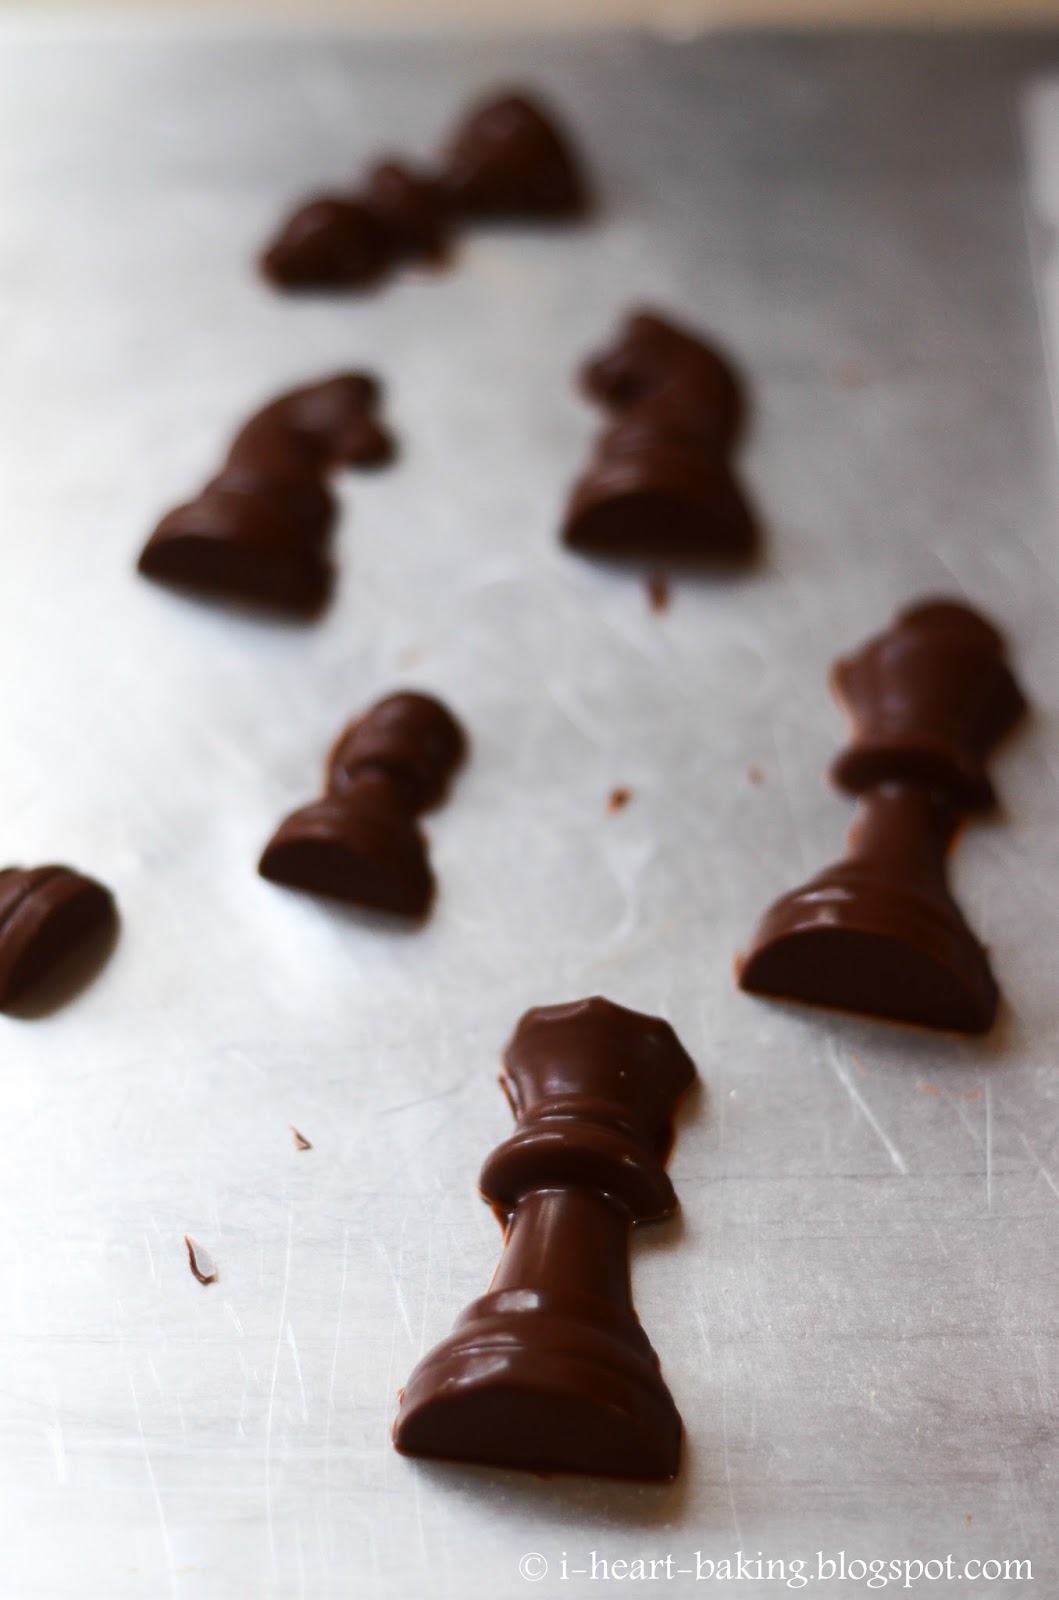 i heart baking!: chess cake with handmade chocolate chess pieces